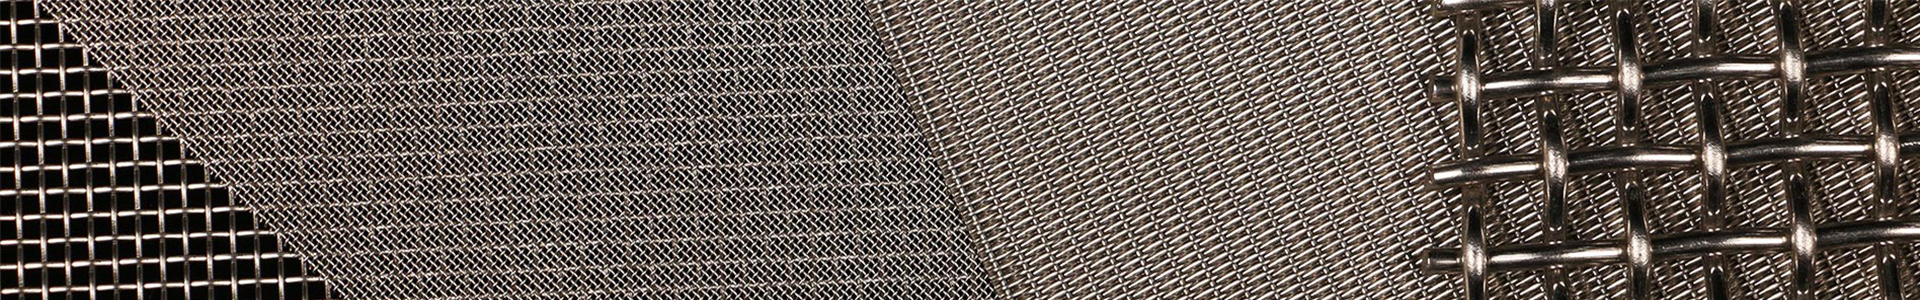 MULTI LAYERS WELD EXTRUDER SCREENS 